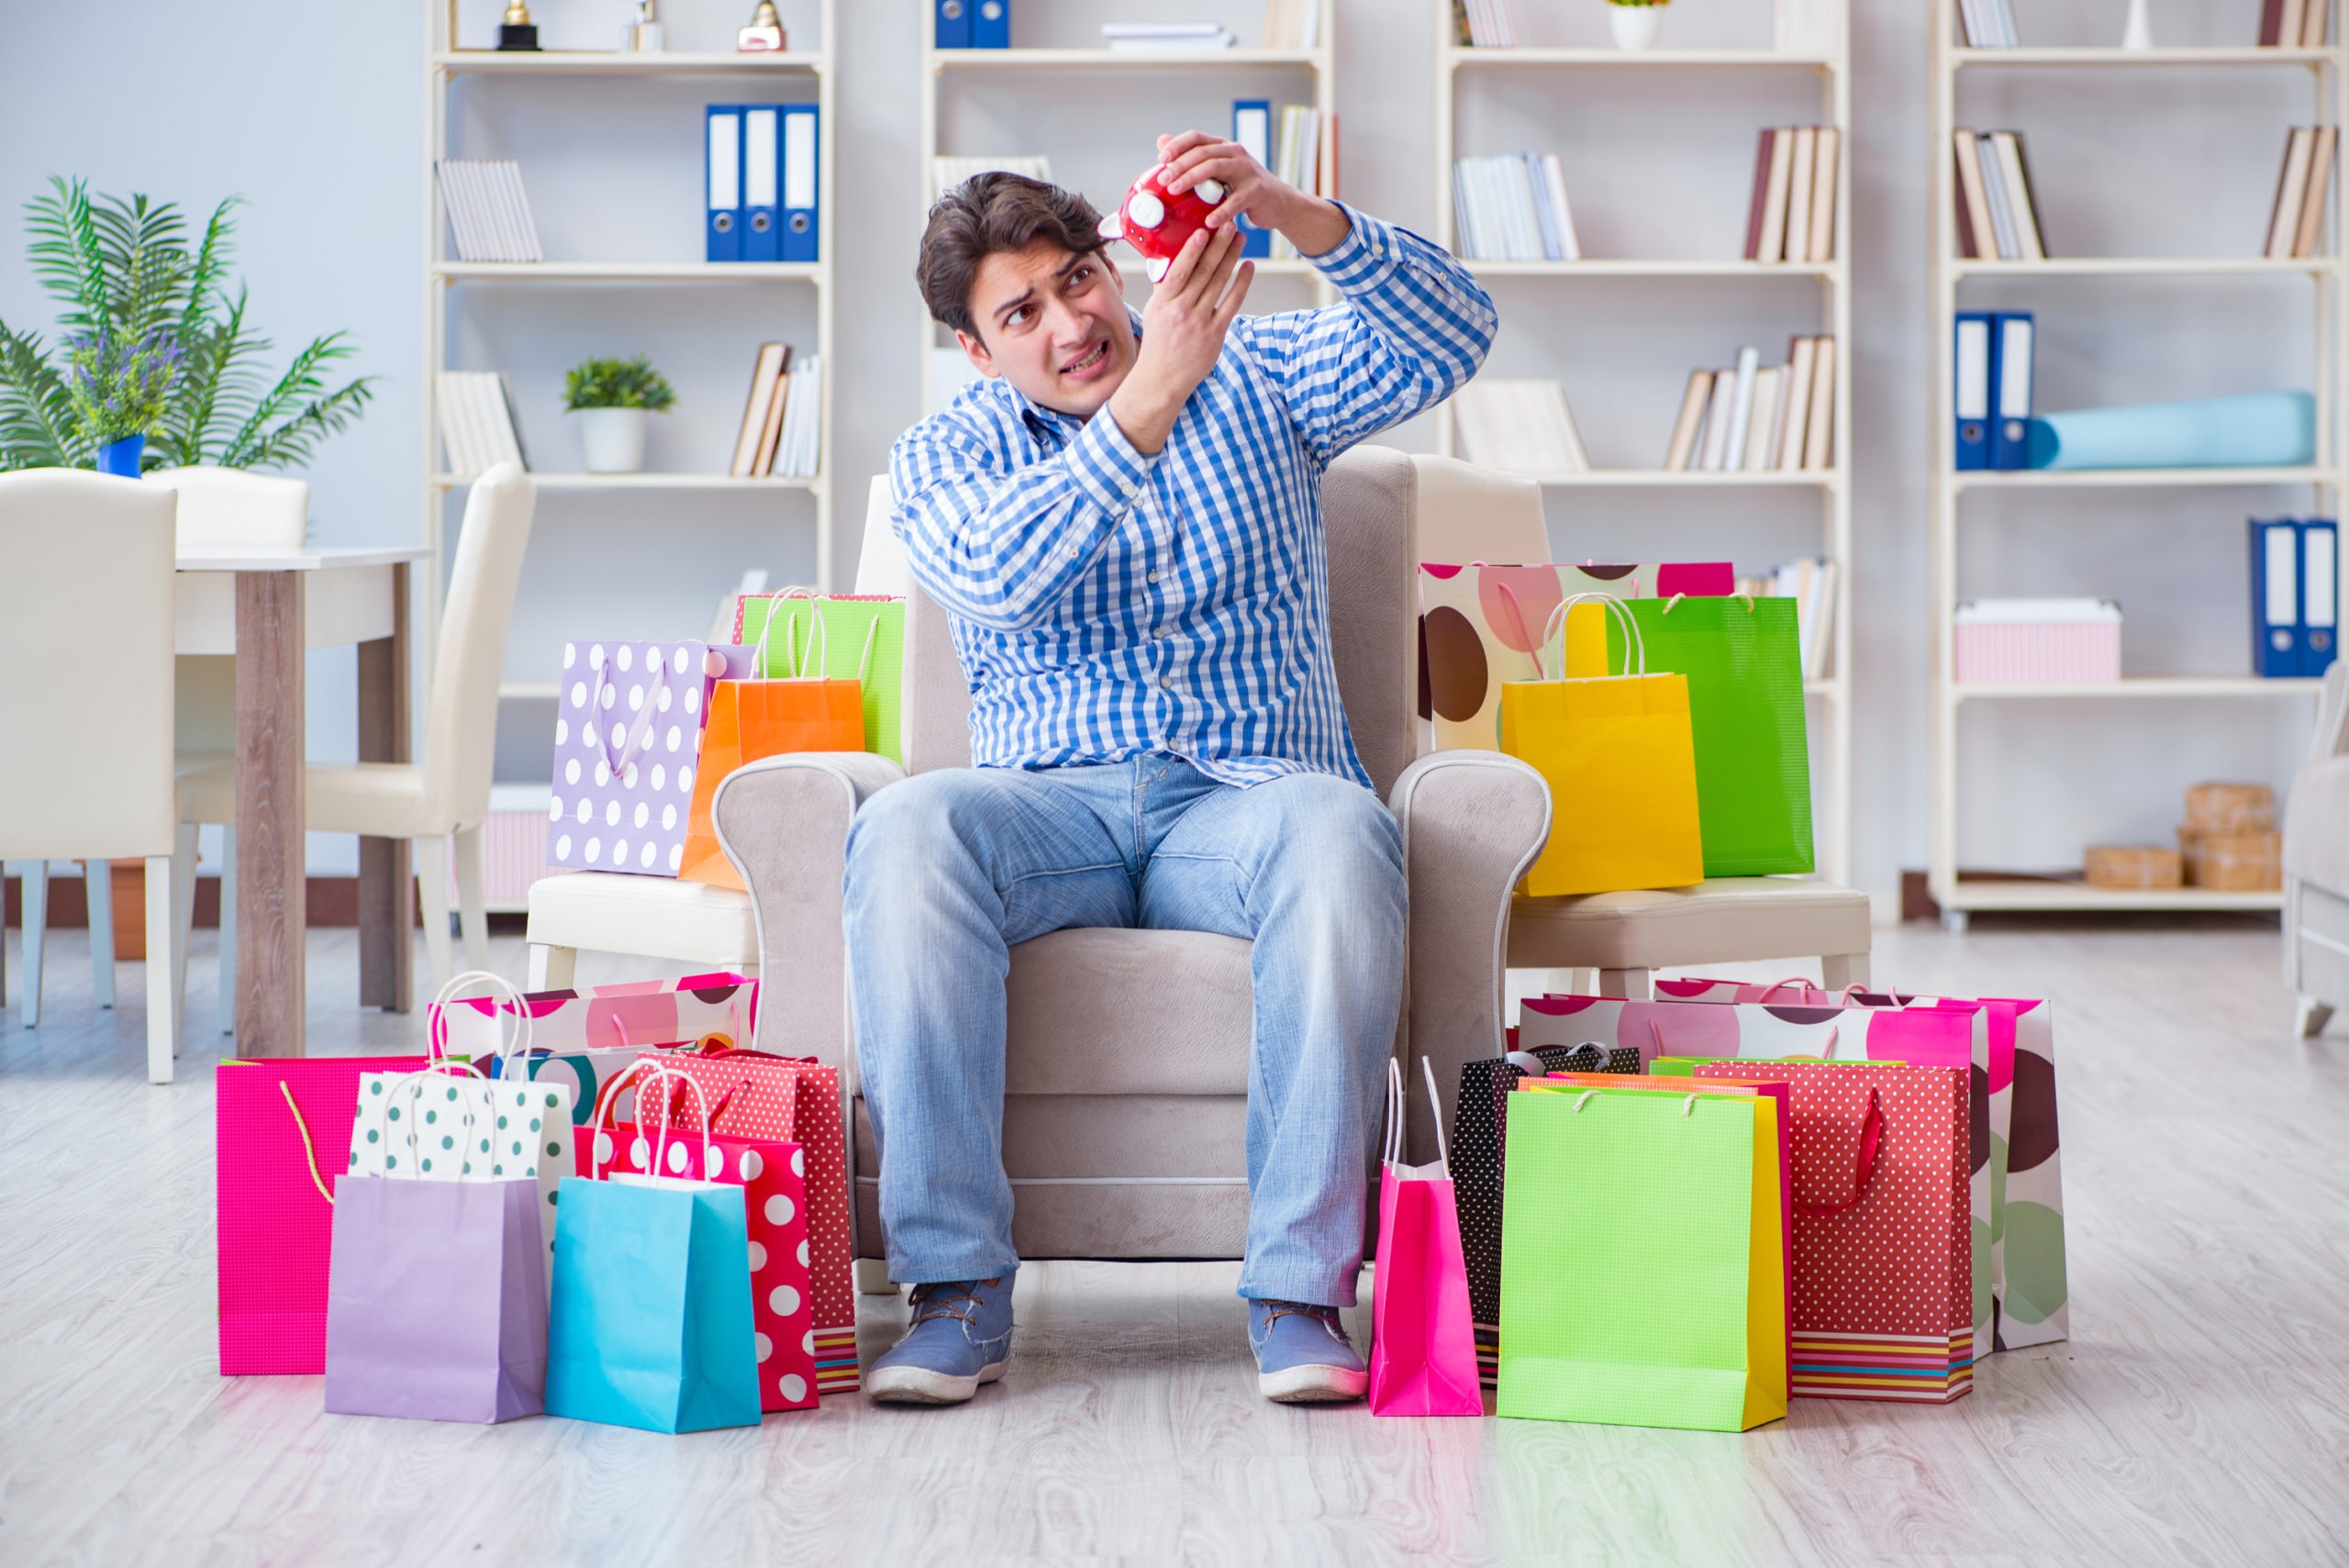 Stress-Shopping Might Be Hurting Your Wallet